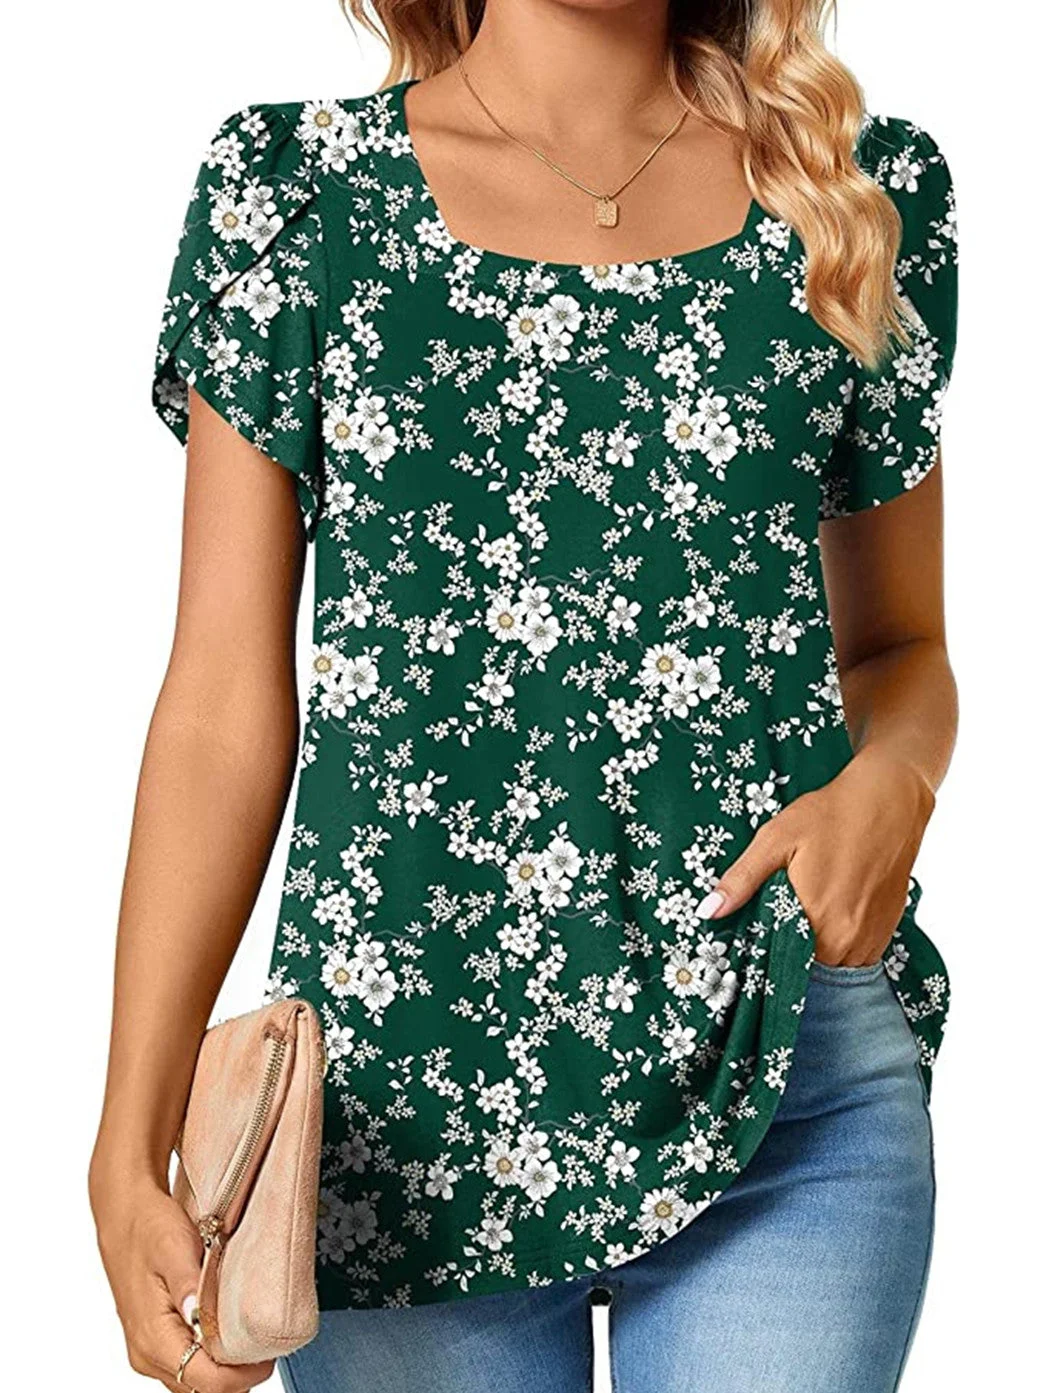 Women's Short Sleeve Square Neck Floral Print Casual Top